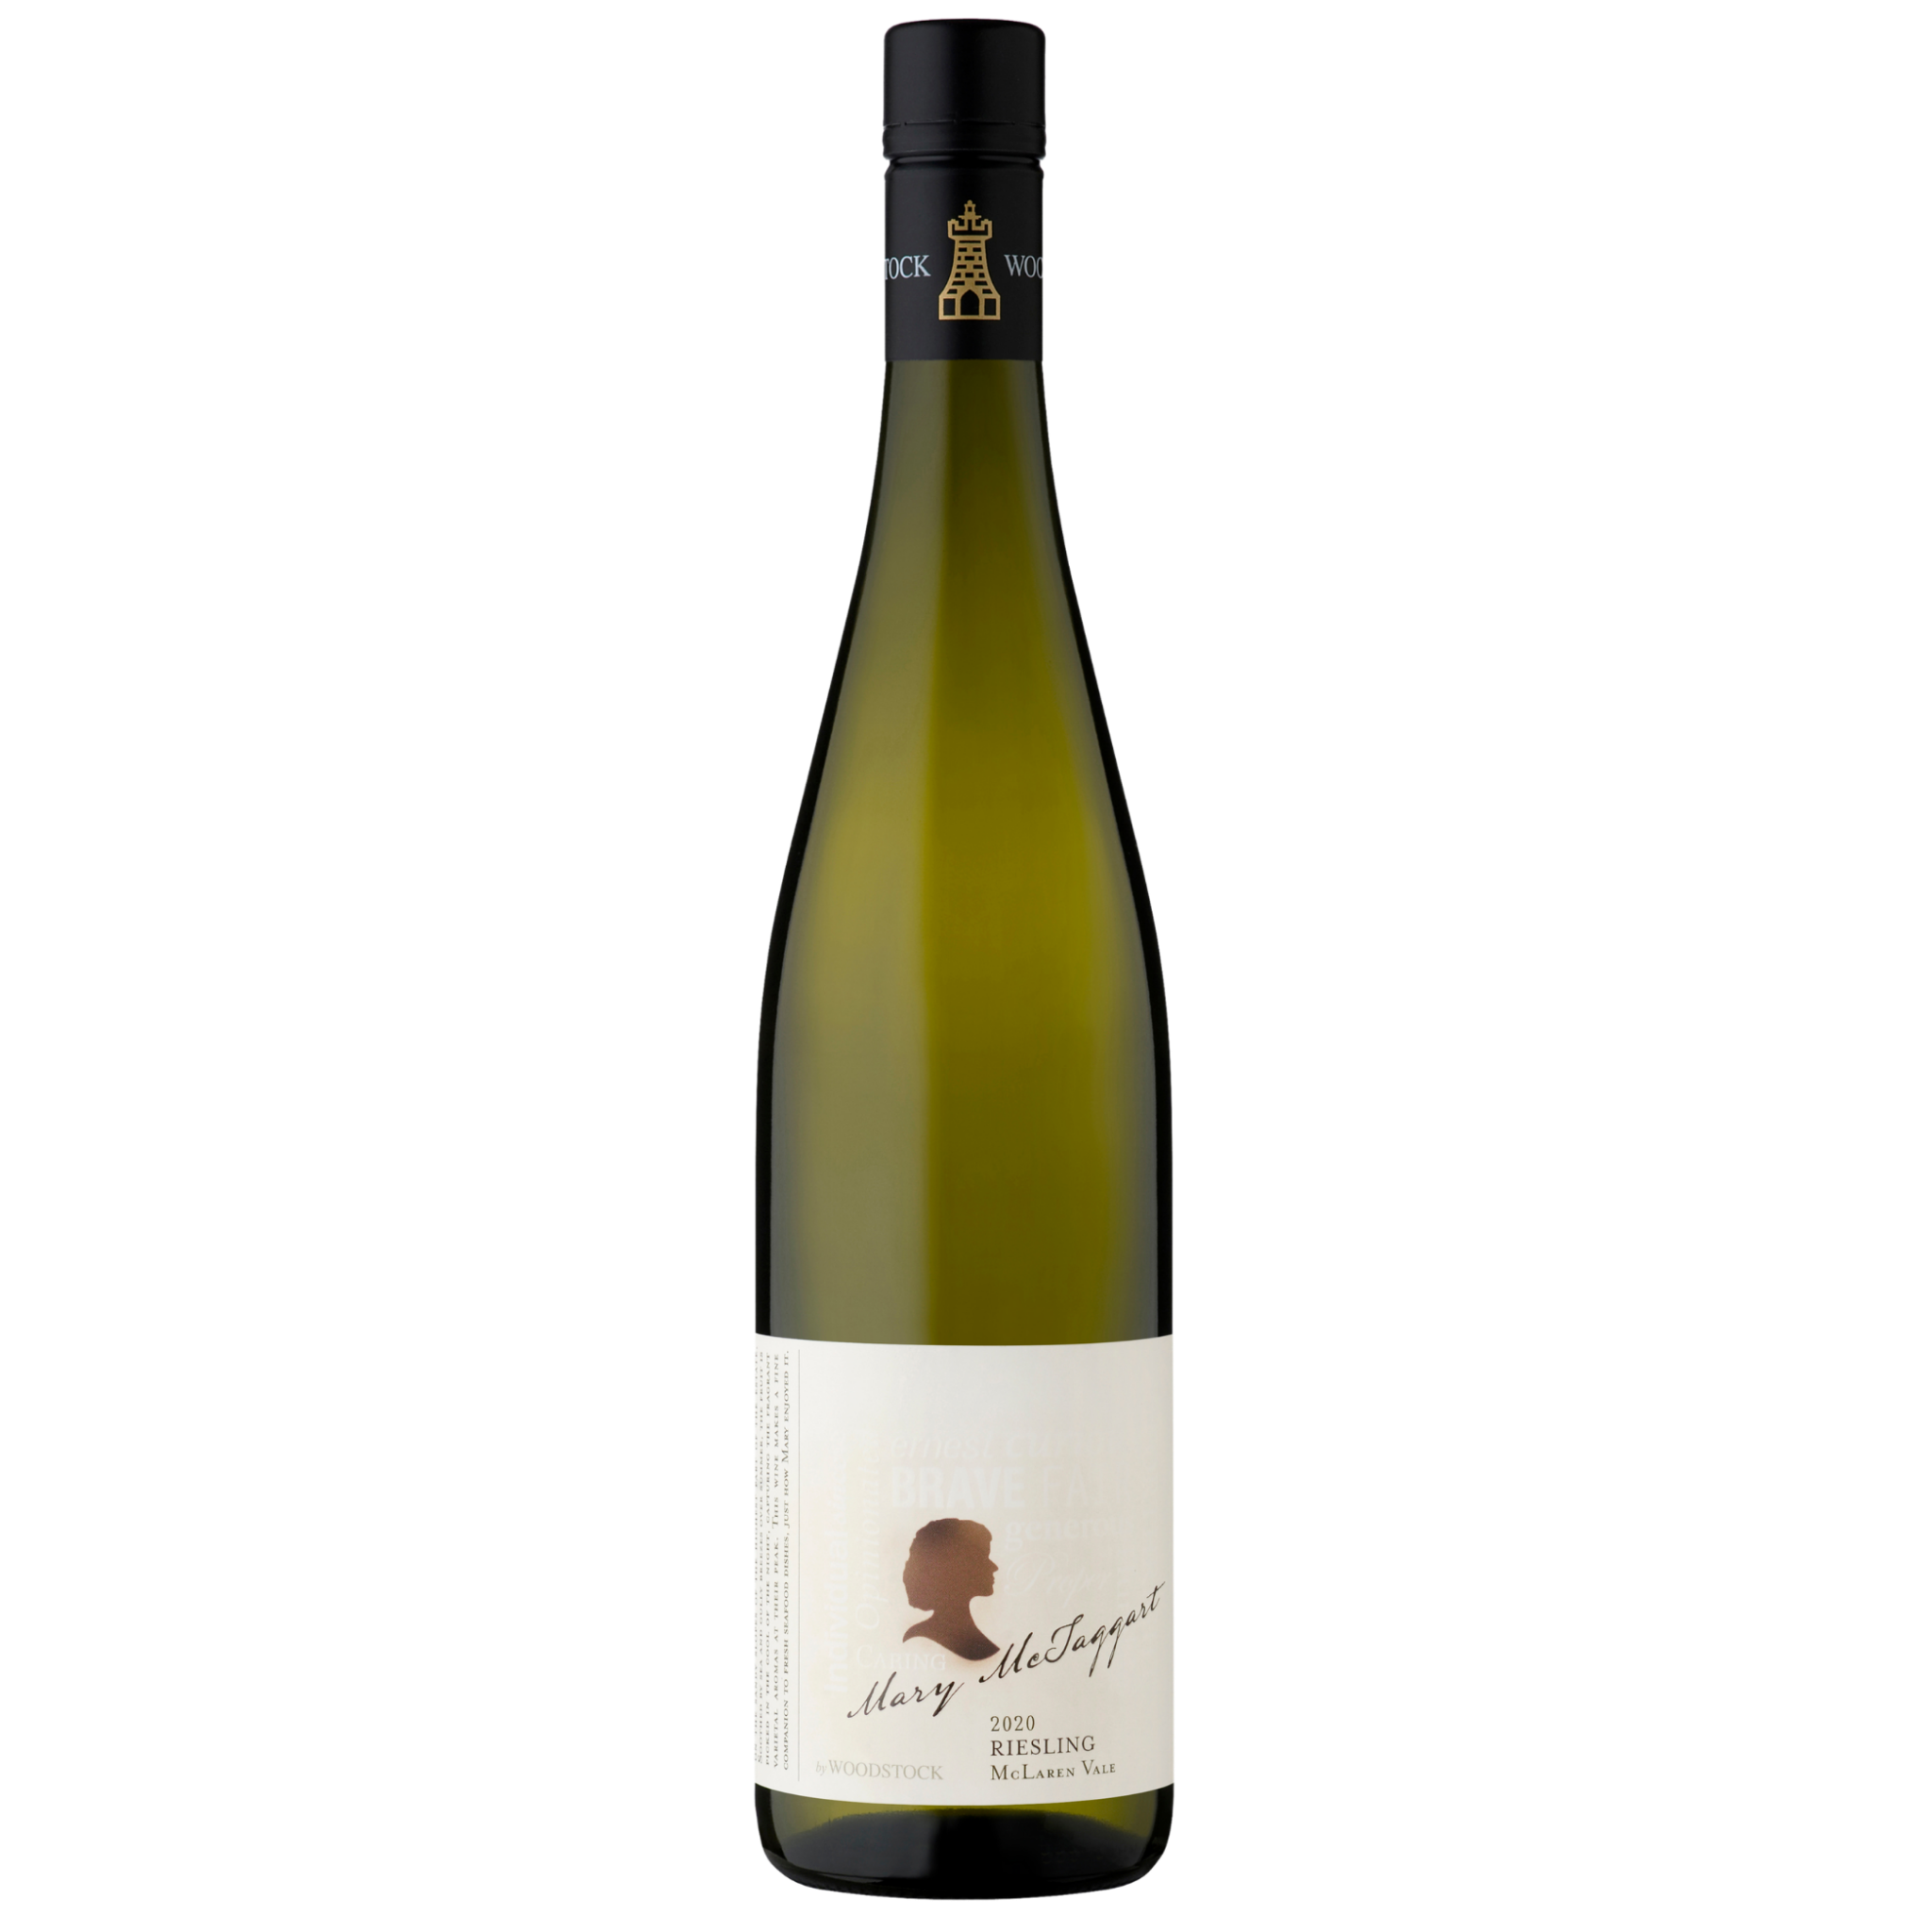 'Mary McTaggart' Riesling 2020